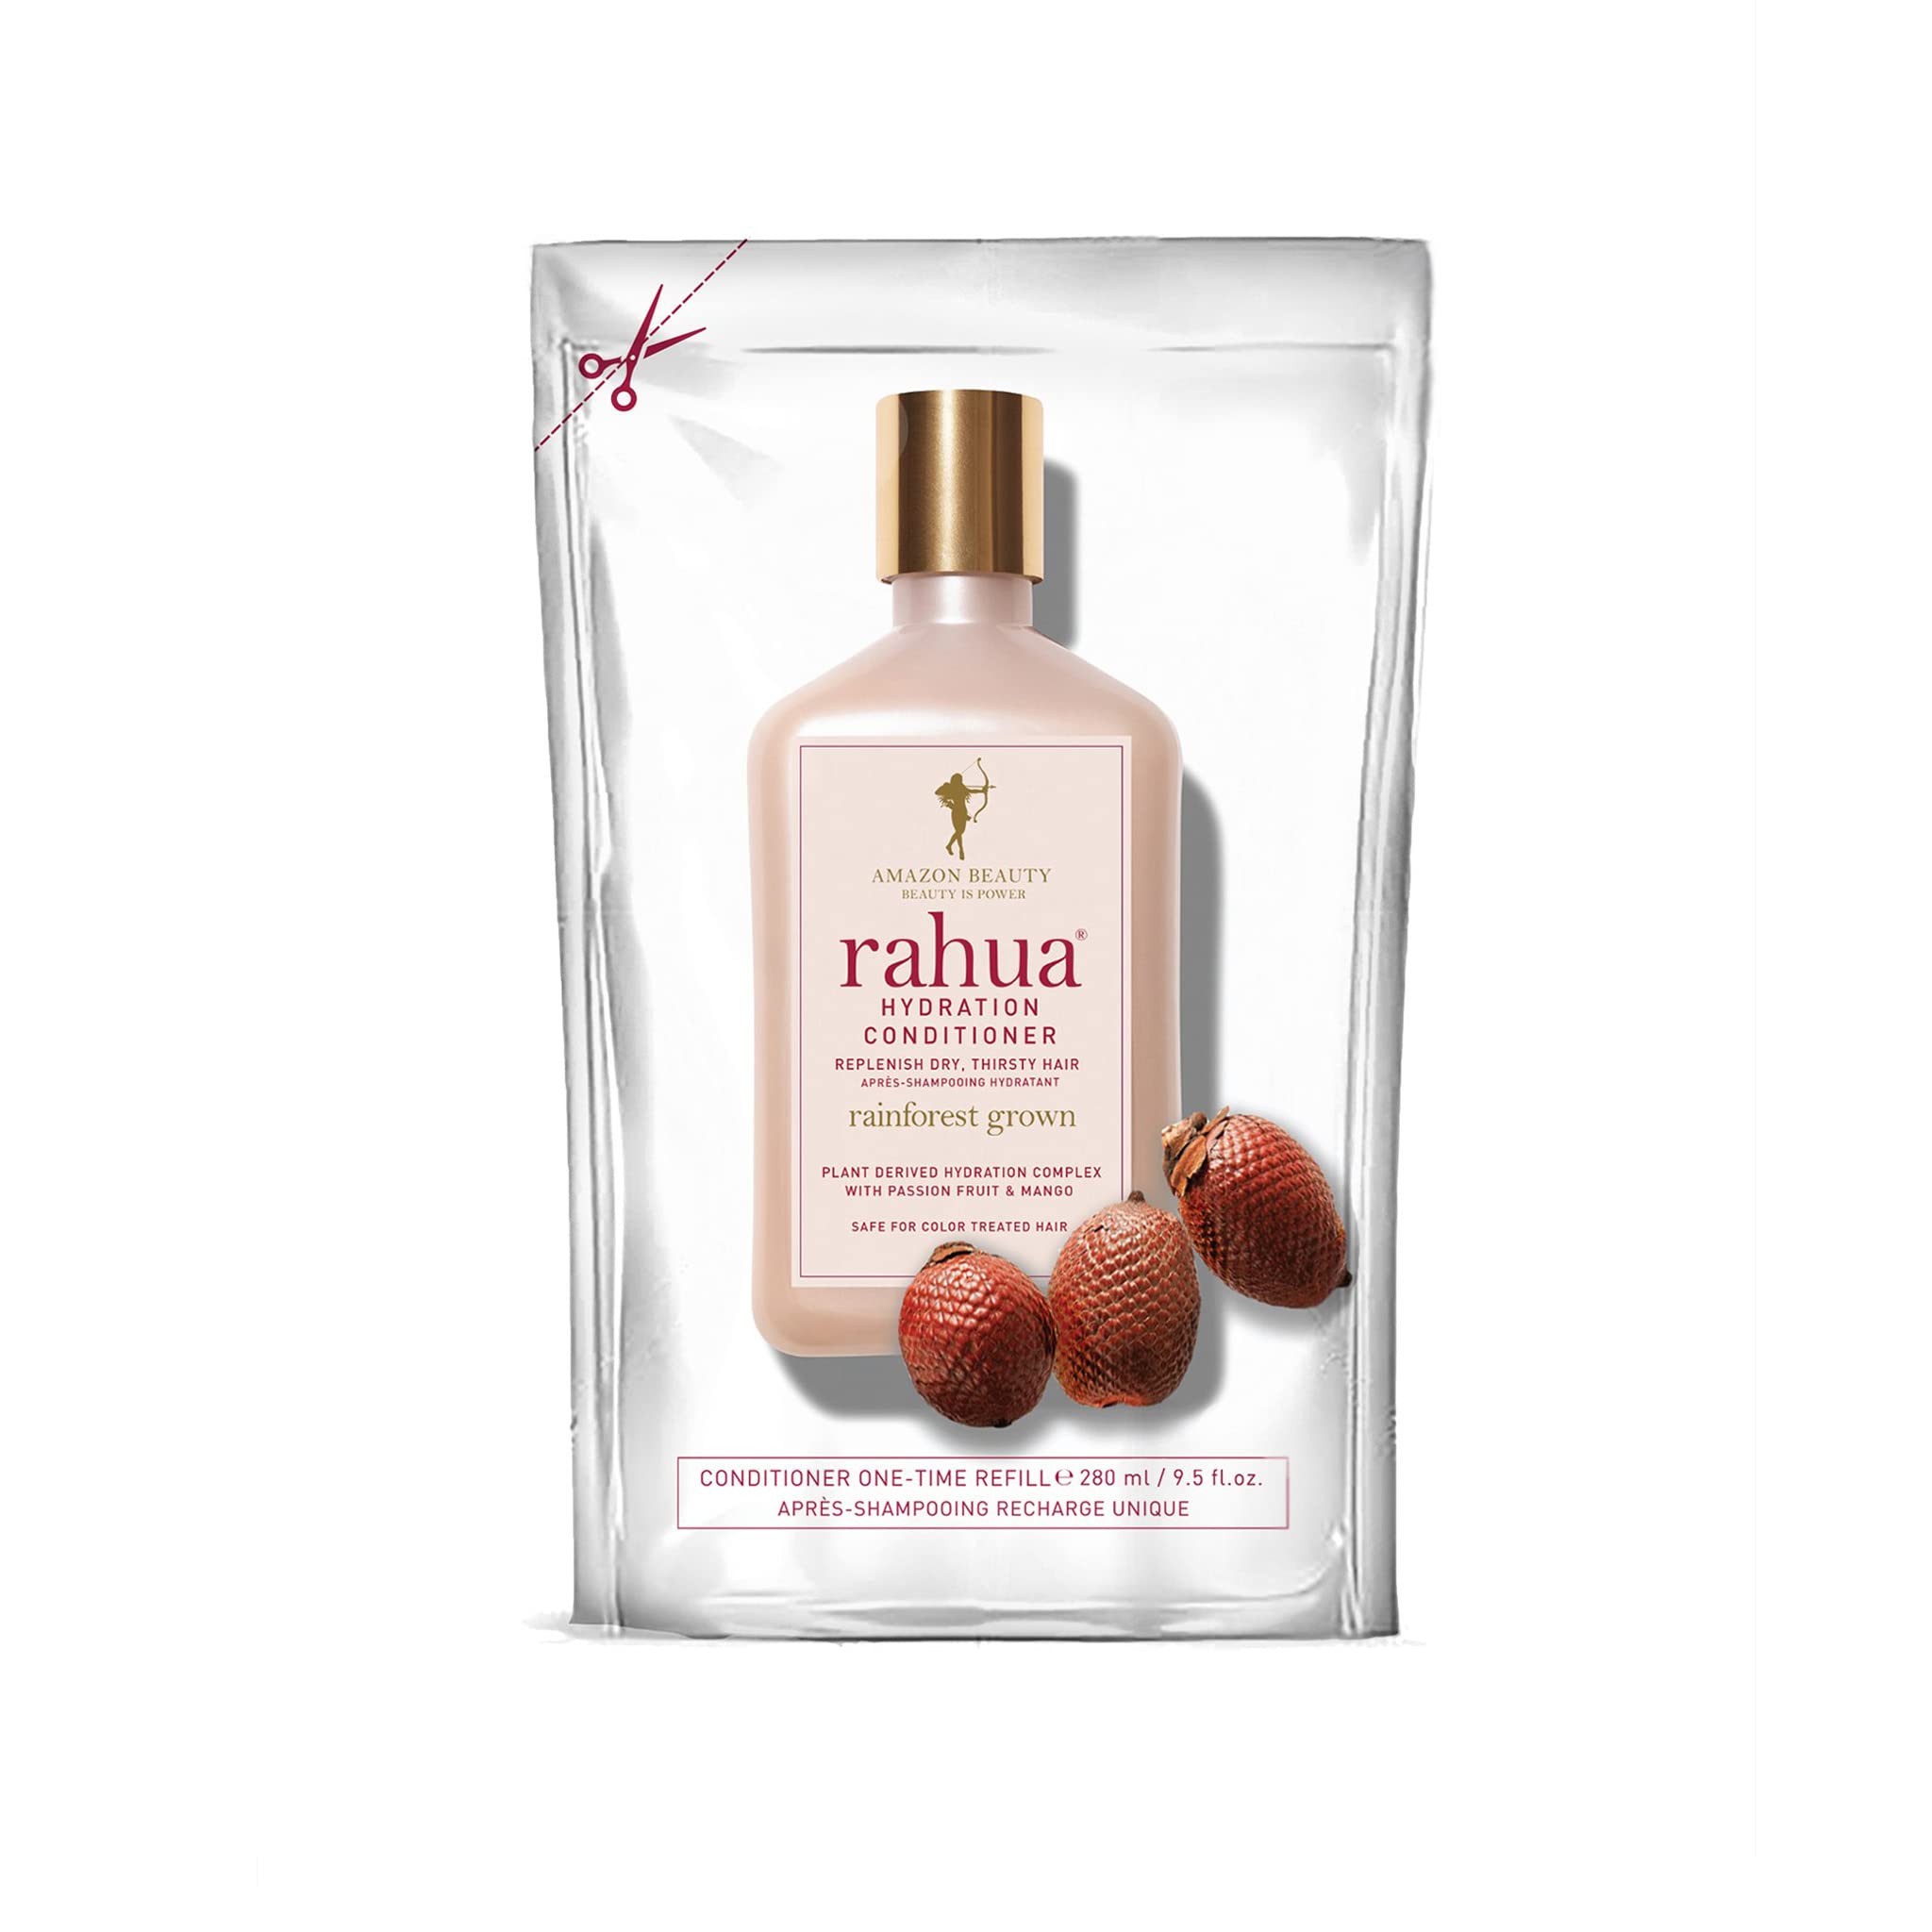 Rahua Hydration Conditioner Refill 9.5 Fl Oz, Hydrating, Nourishing formula with natural ingredients for frizz control and scalp care